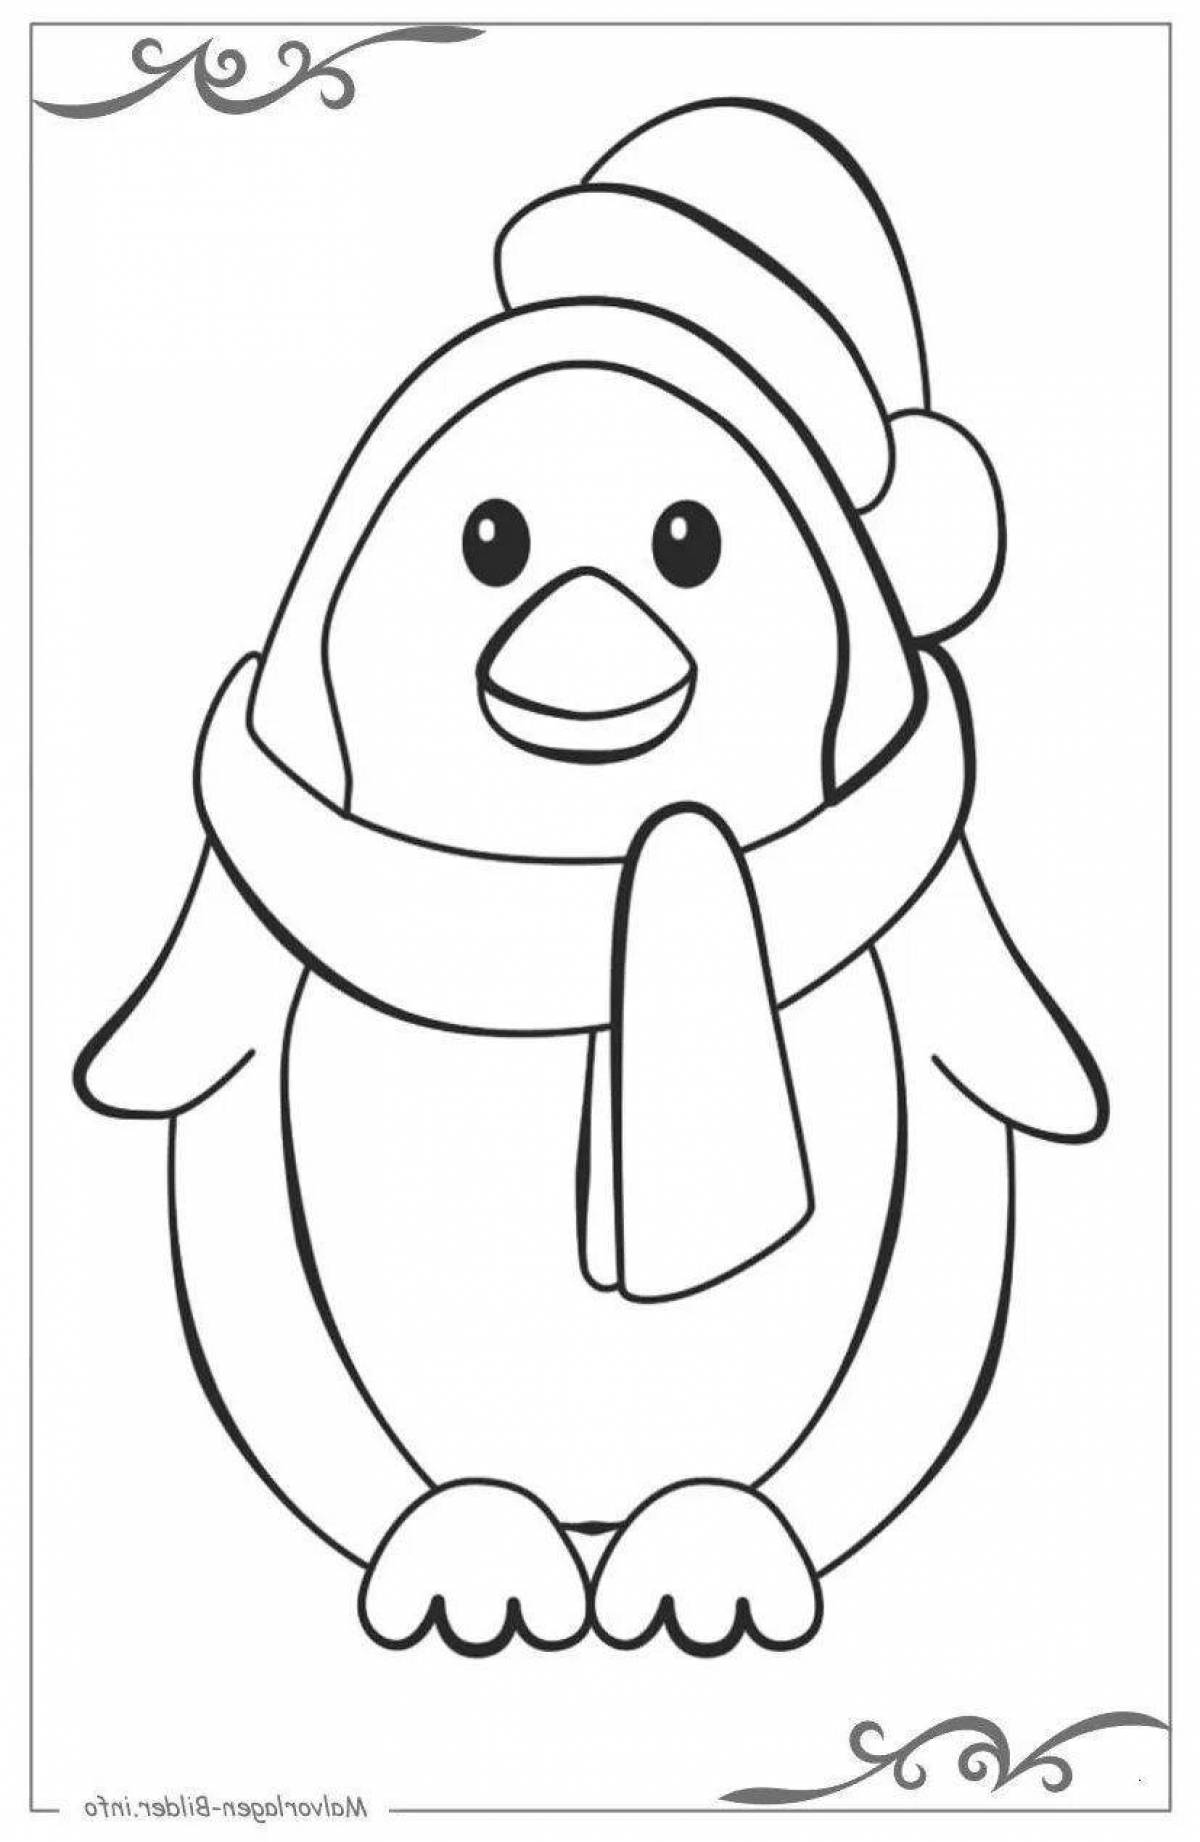 Penguin funny coloring book